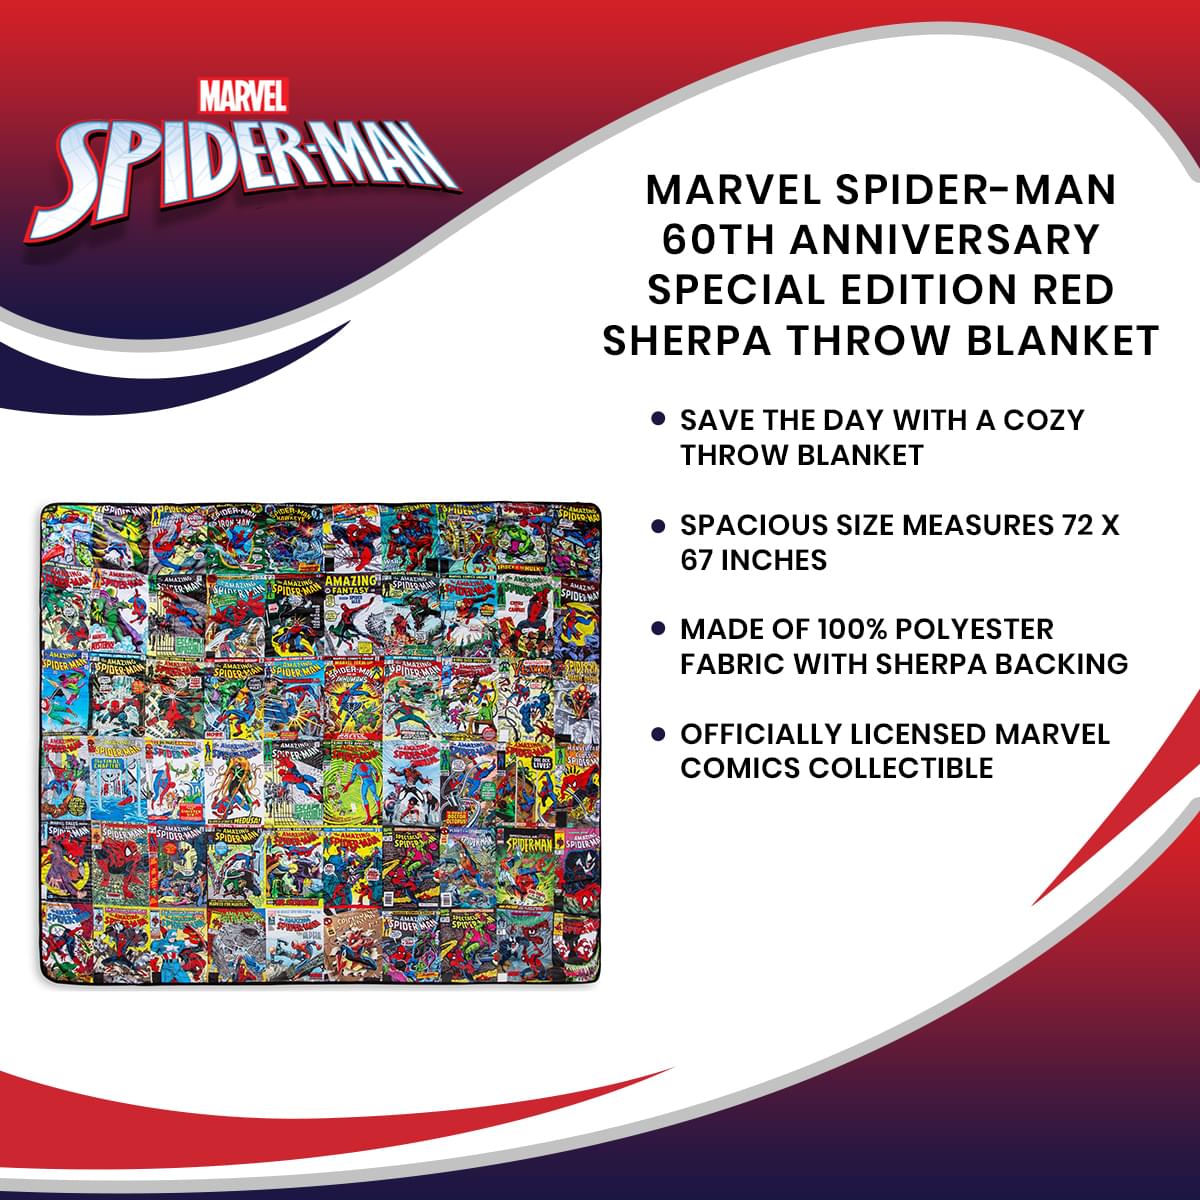 Marvel Spider-Man Swinging Into The Holidays 500 Piece Jigsaw Puzzle